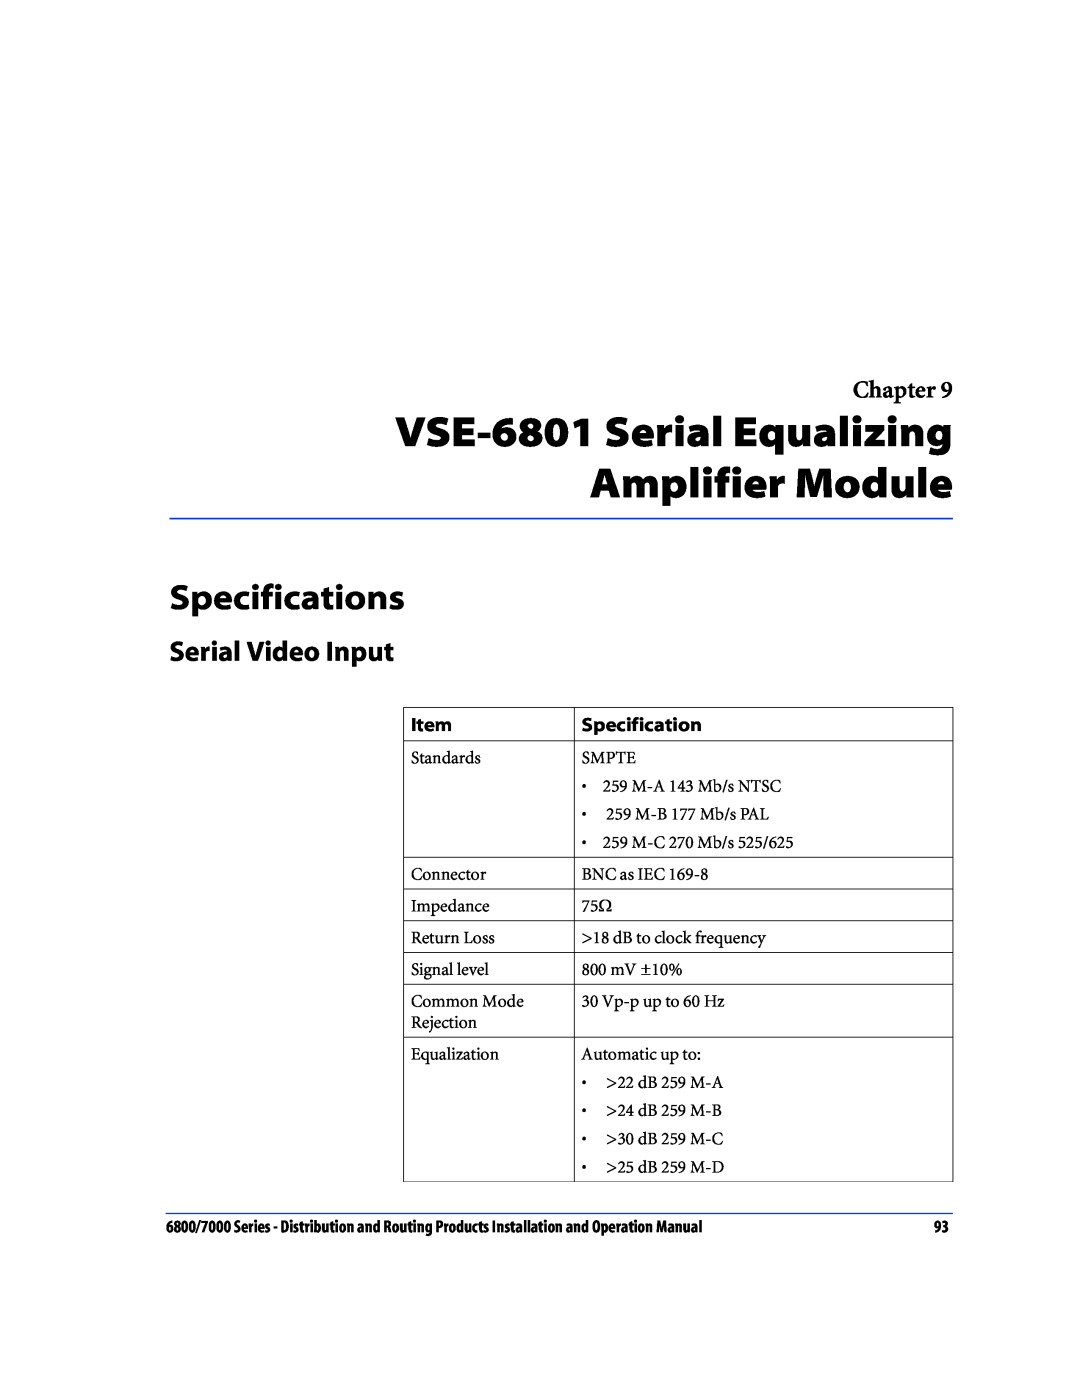 Nokia 6800 Series, 7000 Series VSE-6801 Serial Equalizing Amplifier Module, Specifications, Serial Video Input, Chapter 